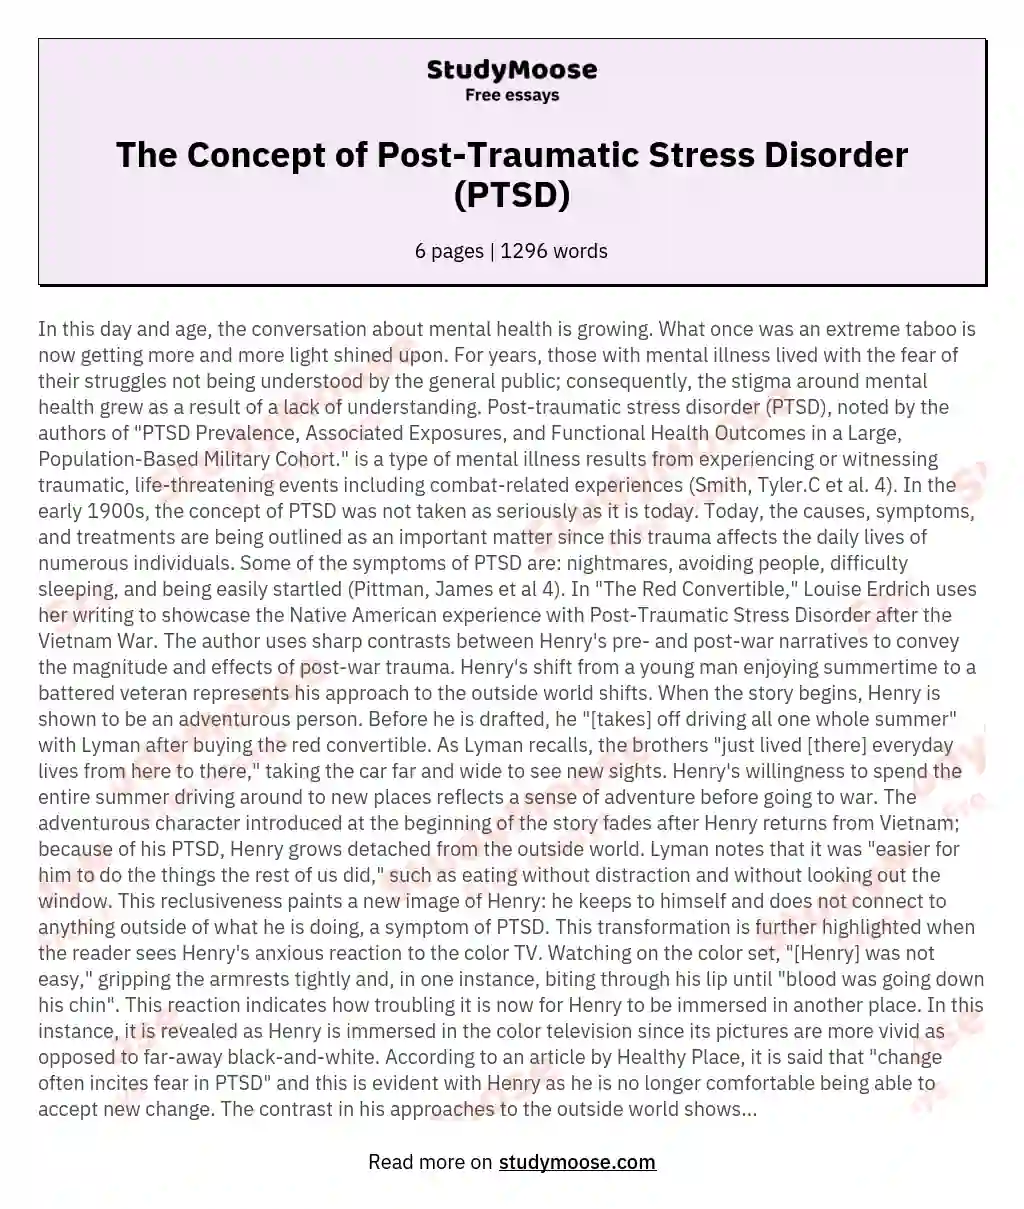 The Concept of Post-Traumatic Stress Disorder (PTSD)